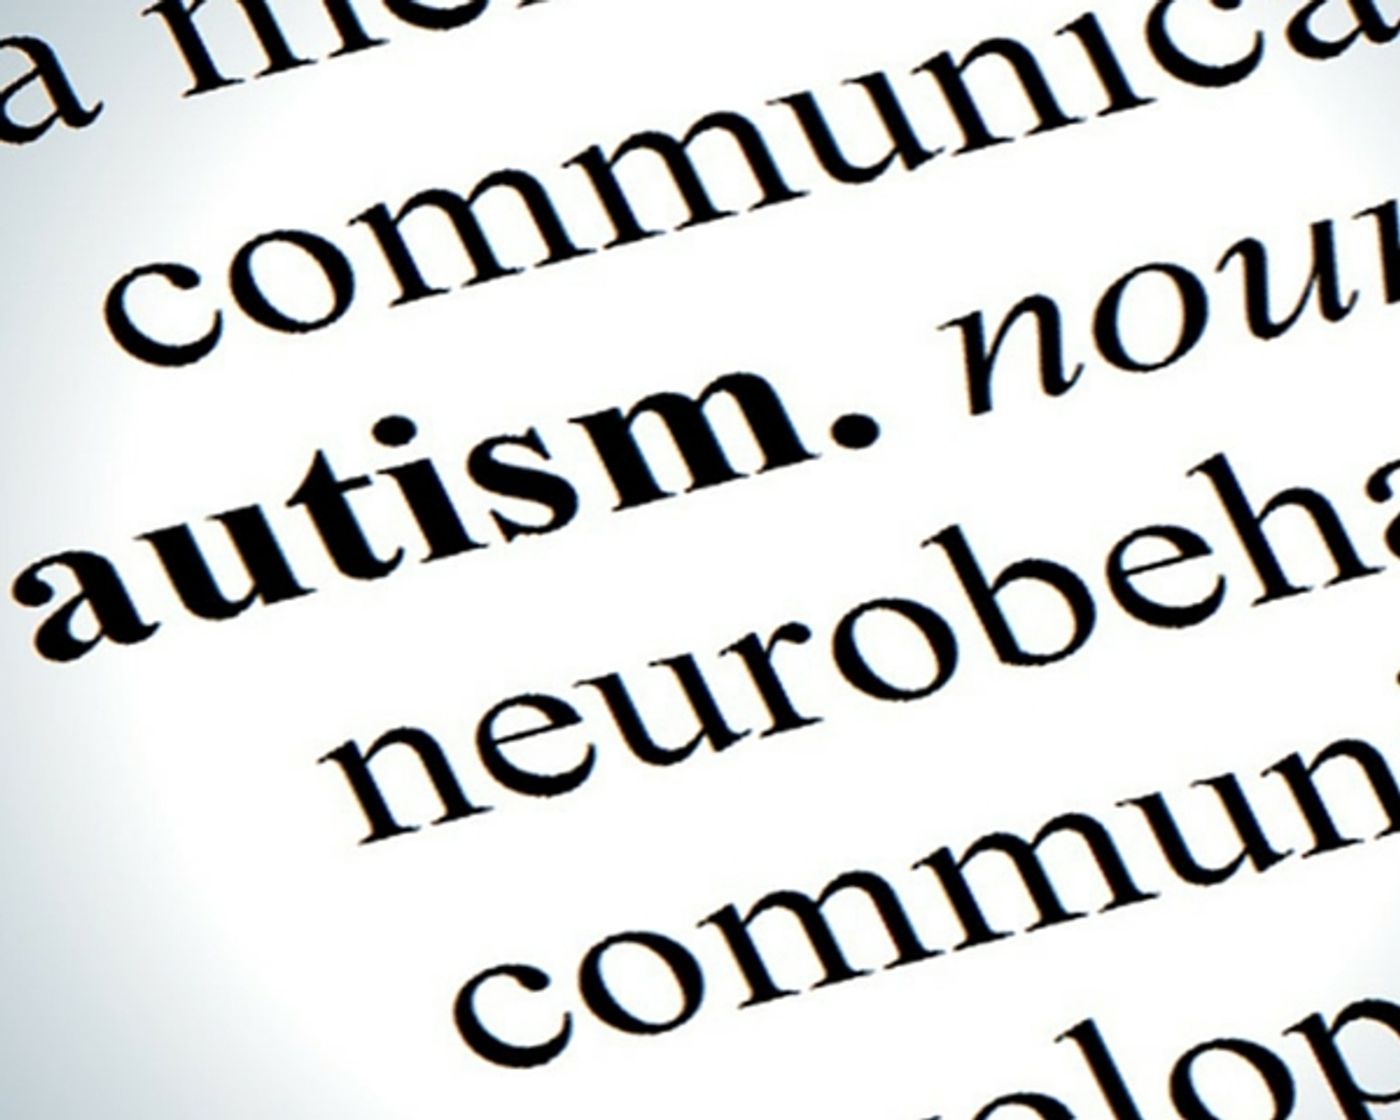 The pathway for GABA could hold clues to autism